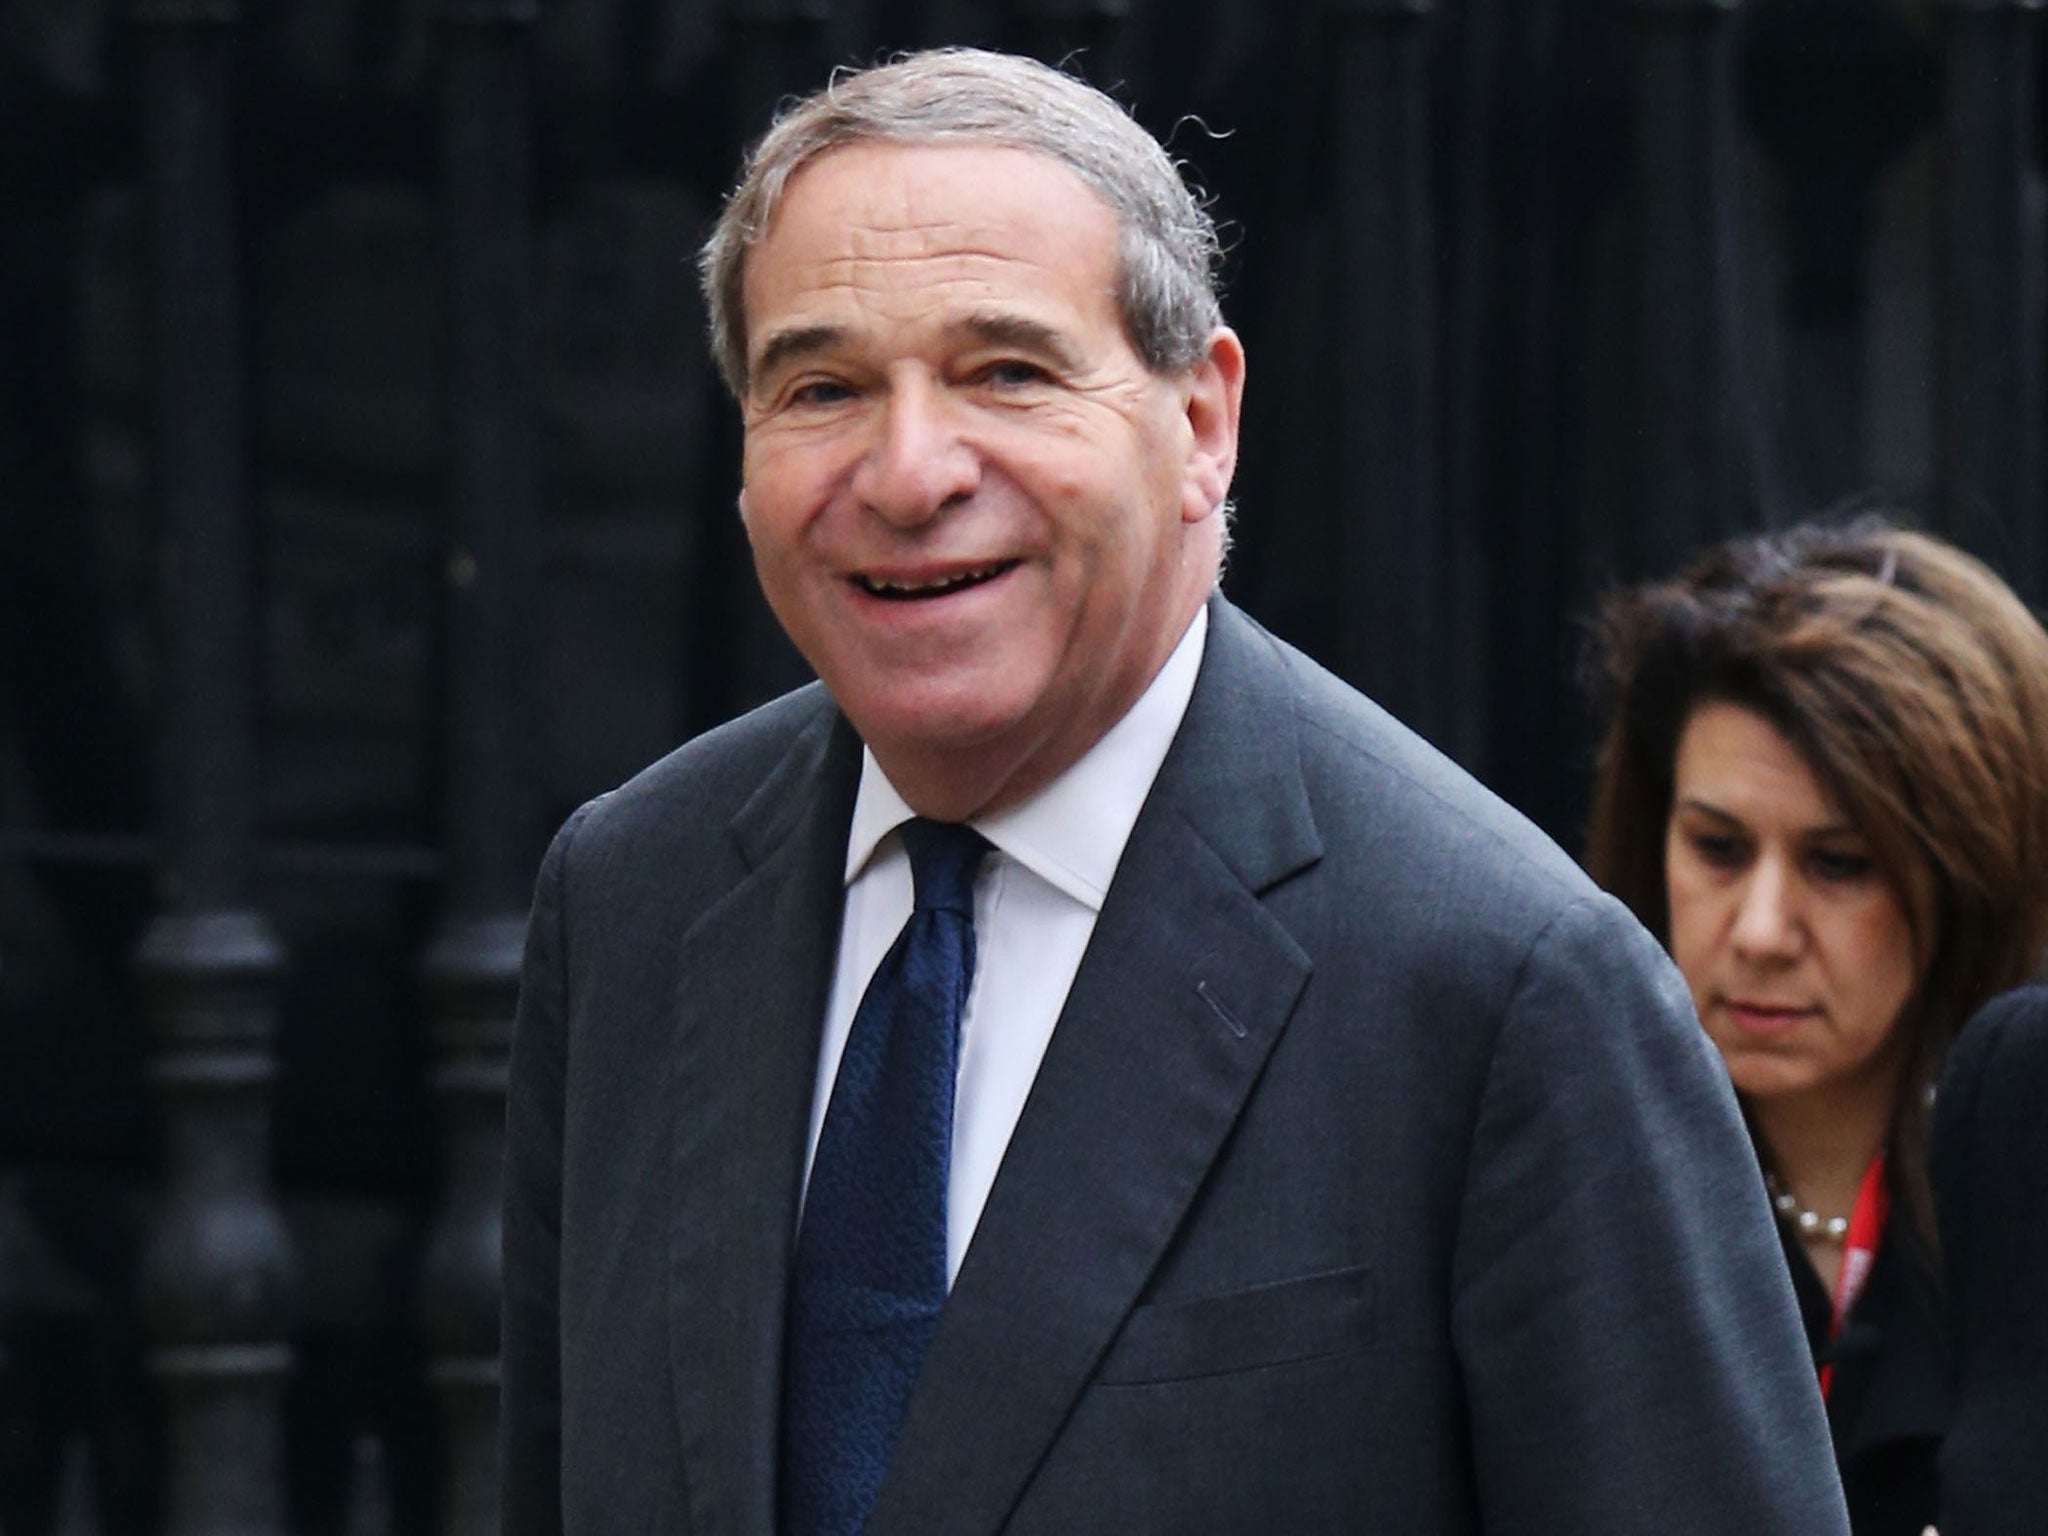 Lord Brittan has admitted receiving a file with allegations
of an abuse network